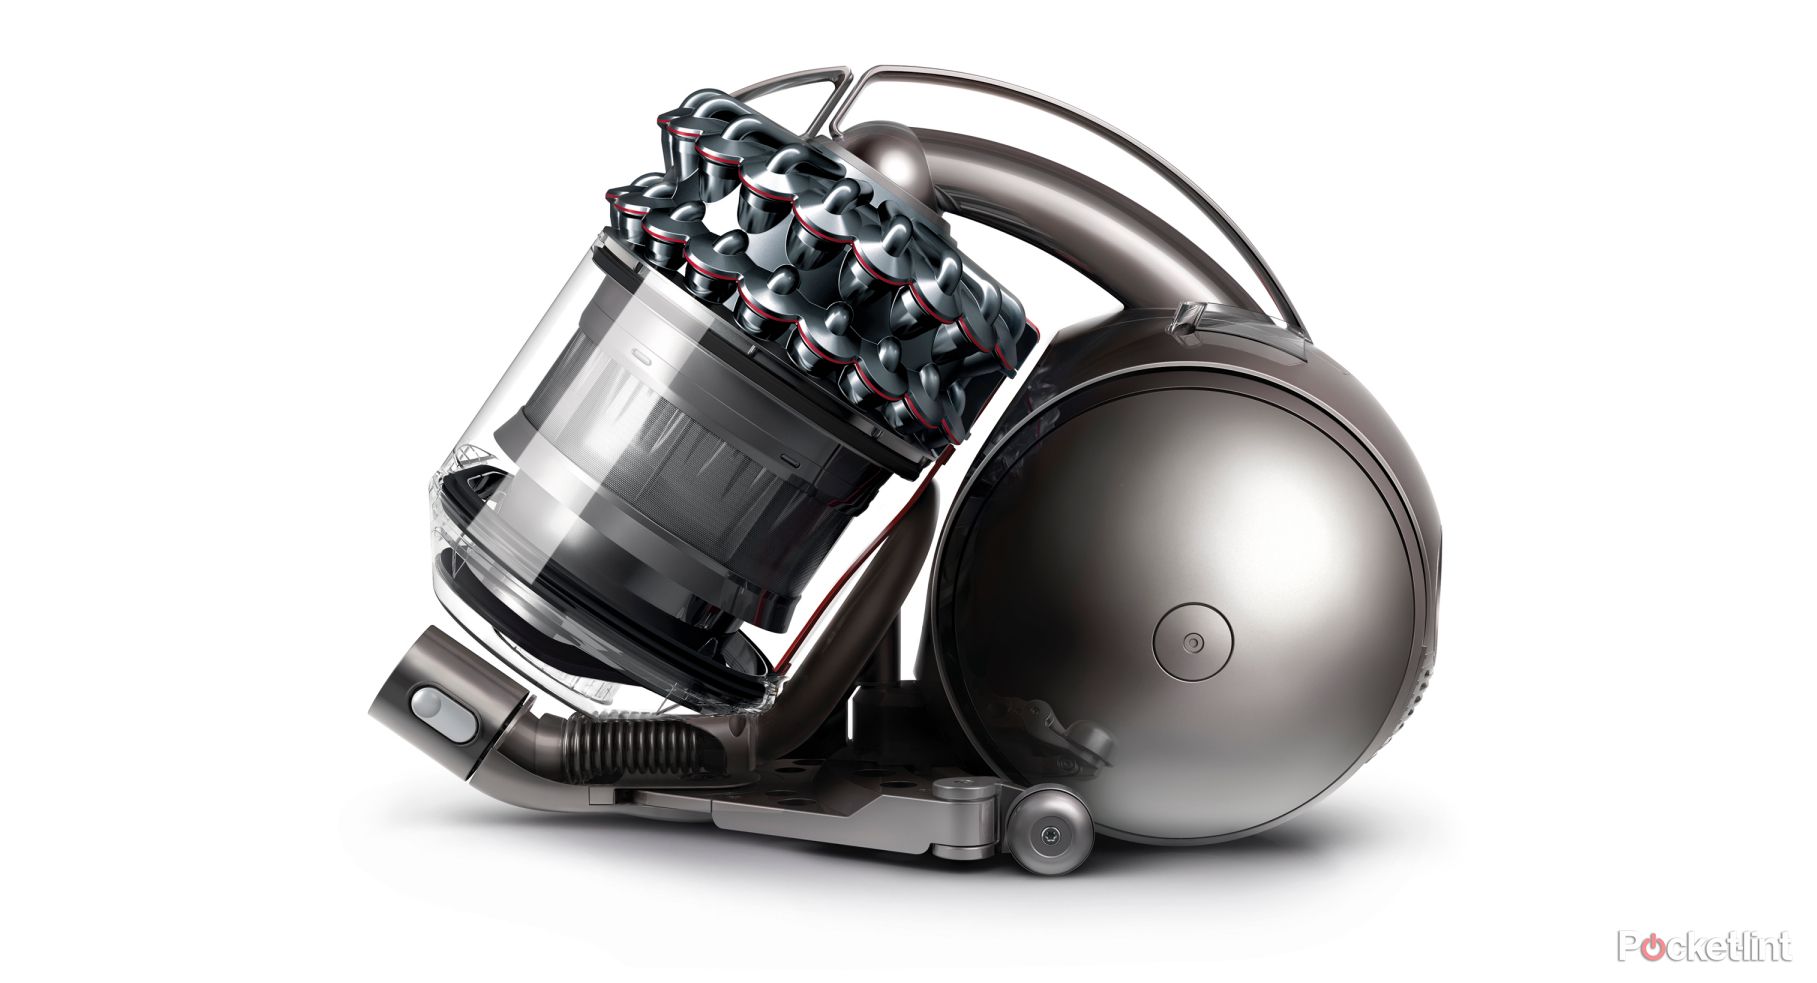 dyson cinetic technology ditches the need for vacuum cleaner filters image 1